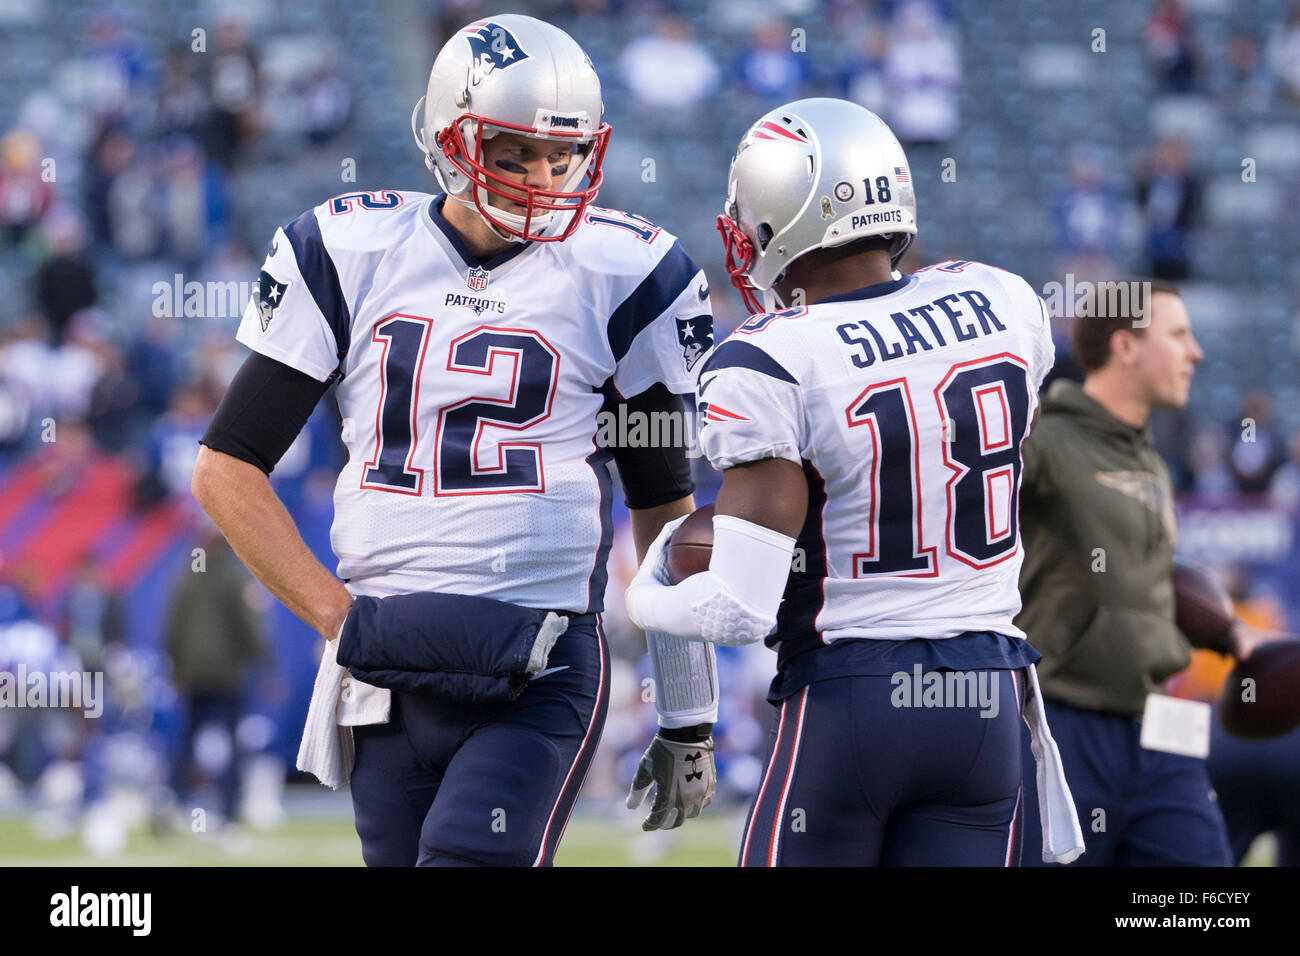 East Rutherford, New Jersey, USA. 15th Nov, 2015. New England Patriots quarterback Tom Brady (12) talks with wide receiver Matthew Slater (18) during warm-ups prior to the NFL game between the New England Patriots and the New York Giants at MetLife Stadium in East Rutherford, New Jersey. The New England Patriots won 27-26. Christopher Szagola/CSM/Alamy Live News Stock Photo